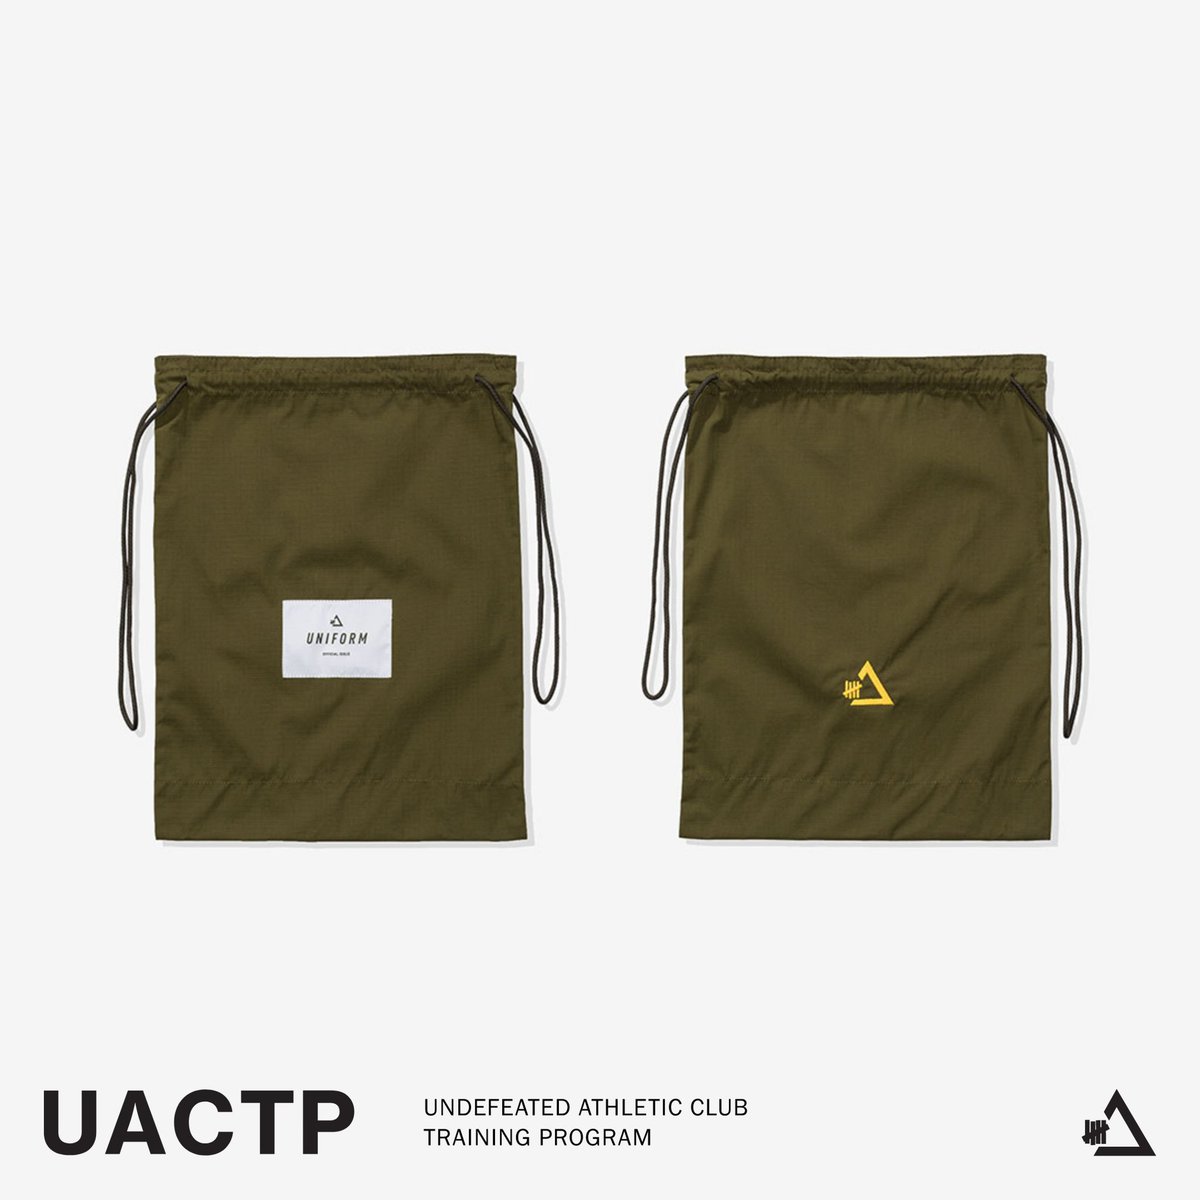 UACTP Lightweight Training Kimono The Training Kimono is available in Army Green in sizes A0-A5 and comes with a cotton ripstop drawstring bag. Available Friday, 5/10 exclusively at UACTP #001, UNDEFEATED New York and Undefeated.com. Shipping internationally